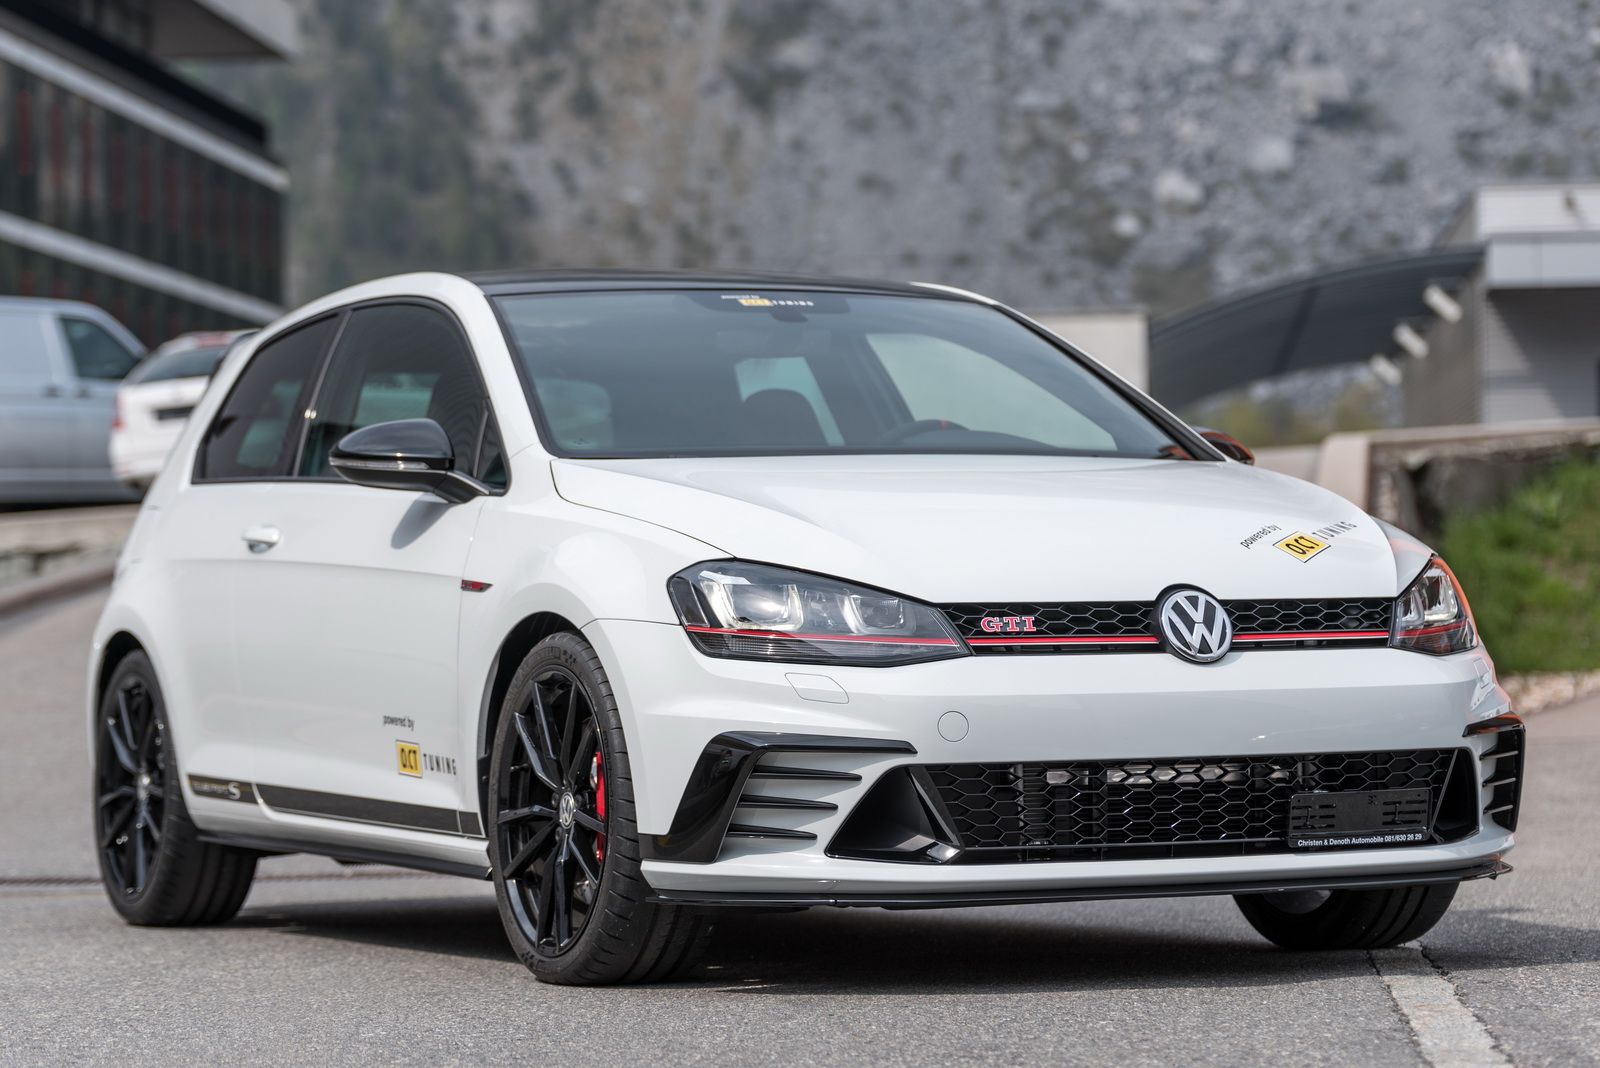 VW Golf GTI Clubsport S By O.CT Tuning Is All About Power | Carscoops